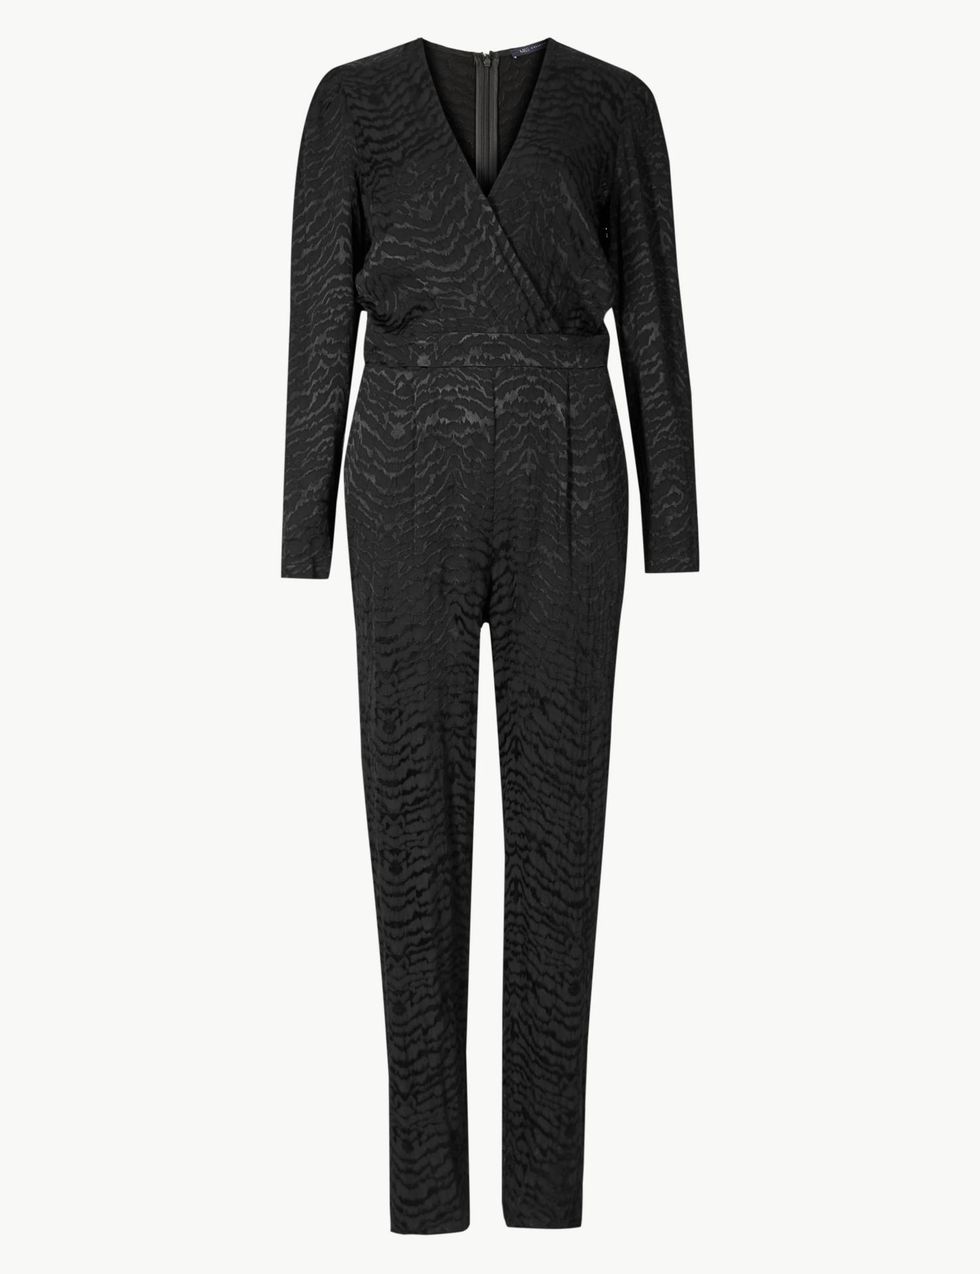 Marks & Spencer releases animal print long sleeve jumpsuit just in time ...